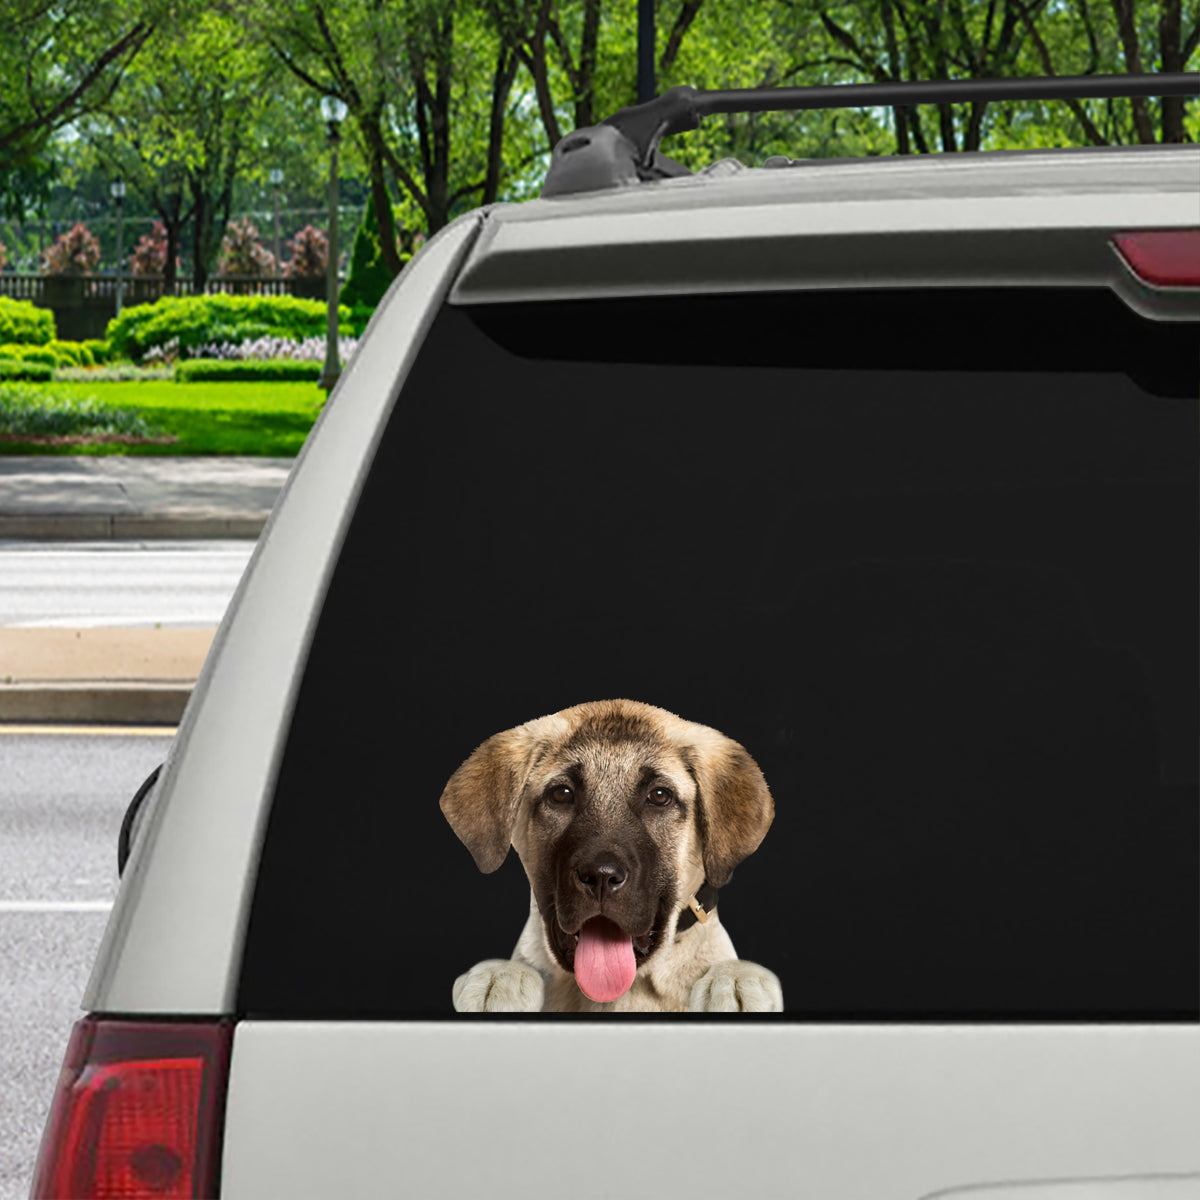 Can You See Me Now - Anatolian Shepherd Car Sticker V1